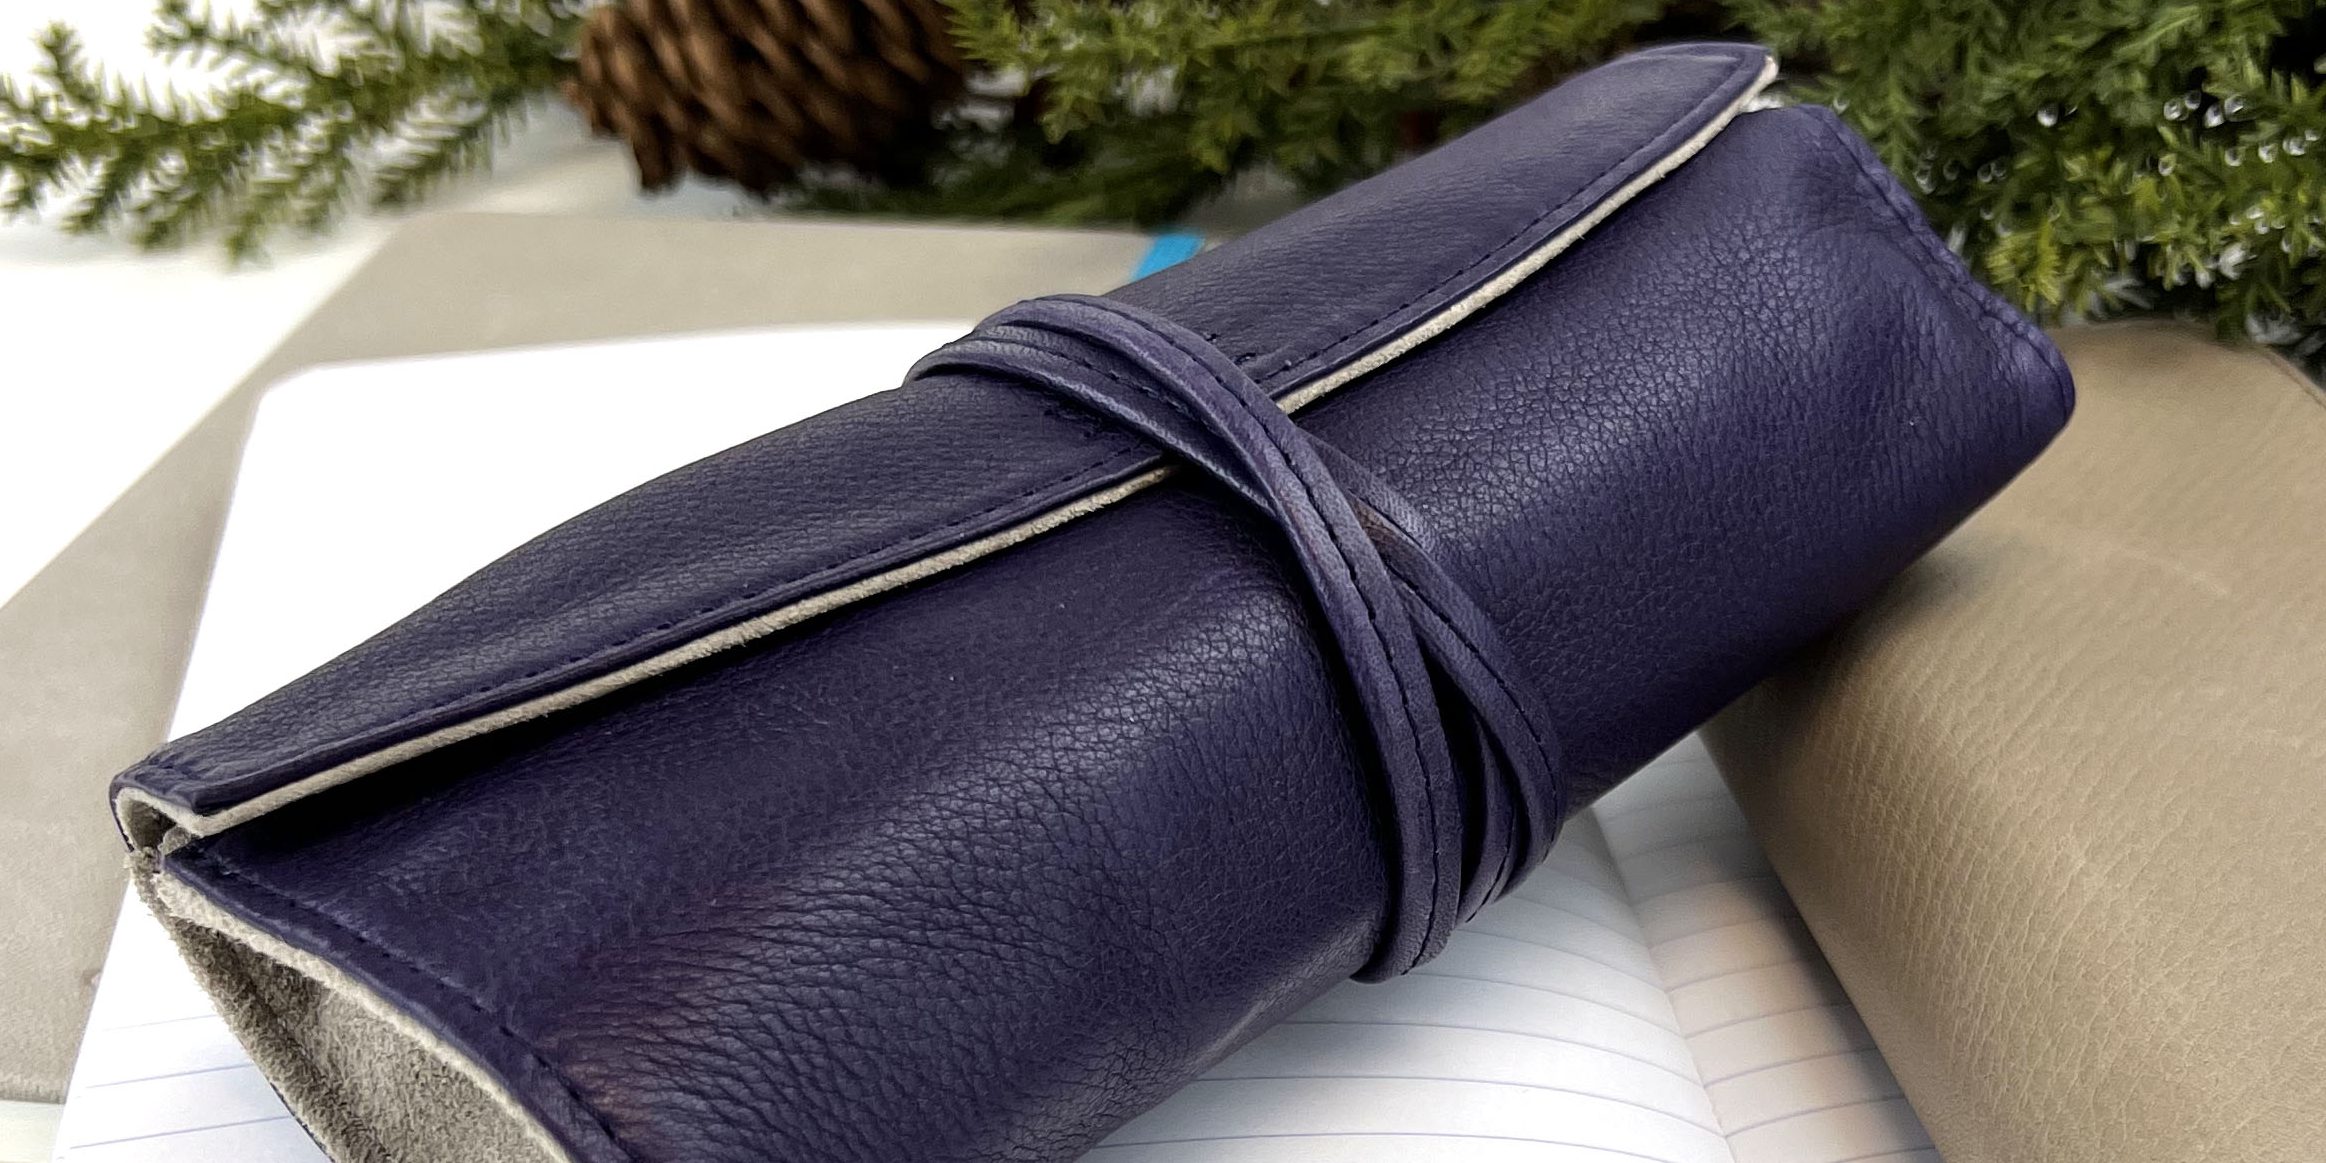 2023 holiday gift guide for pens Pilot Pensemble leather pen roll and leather pen zipper case